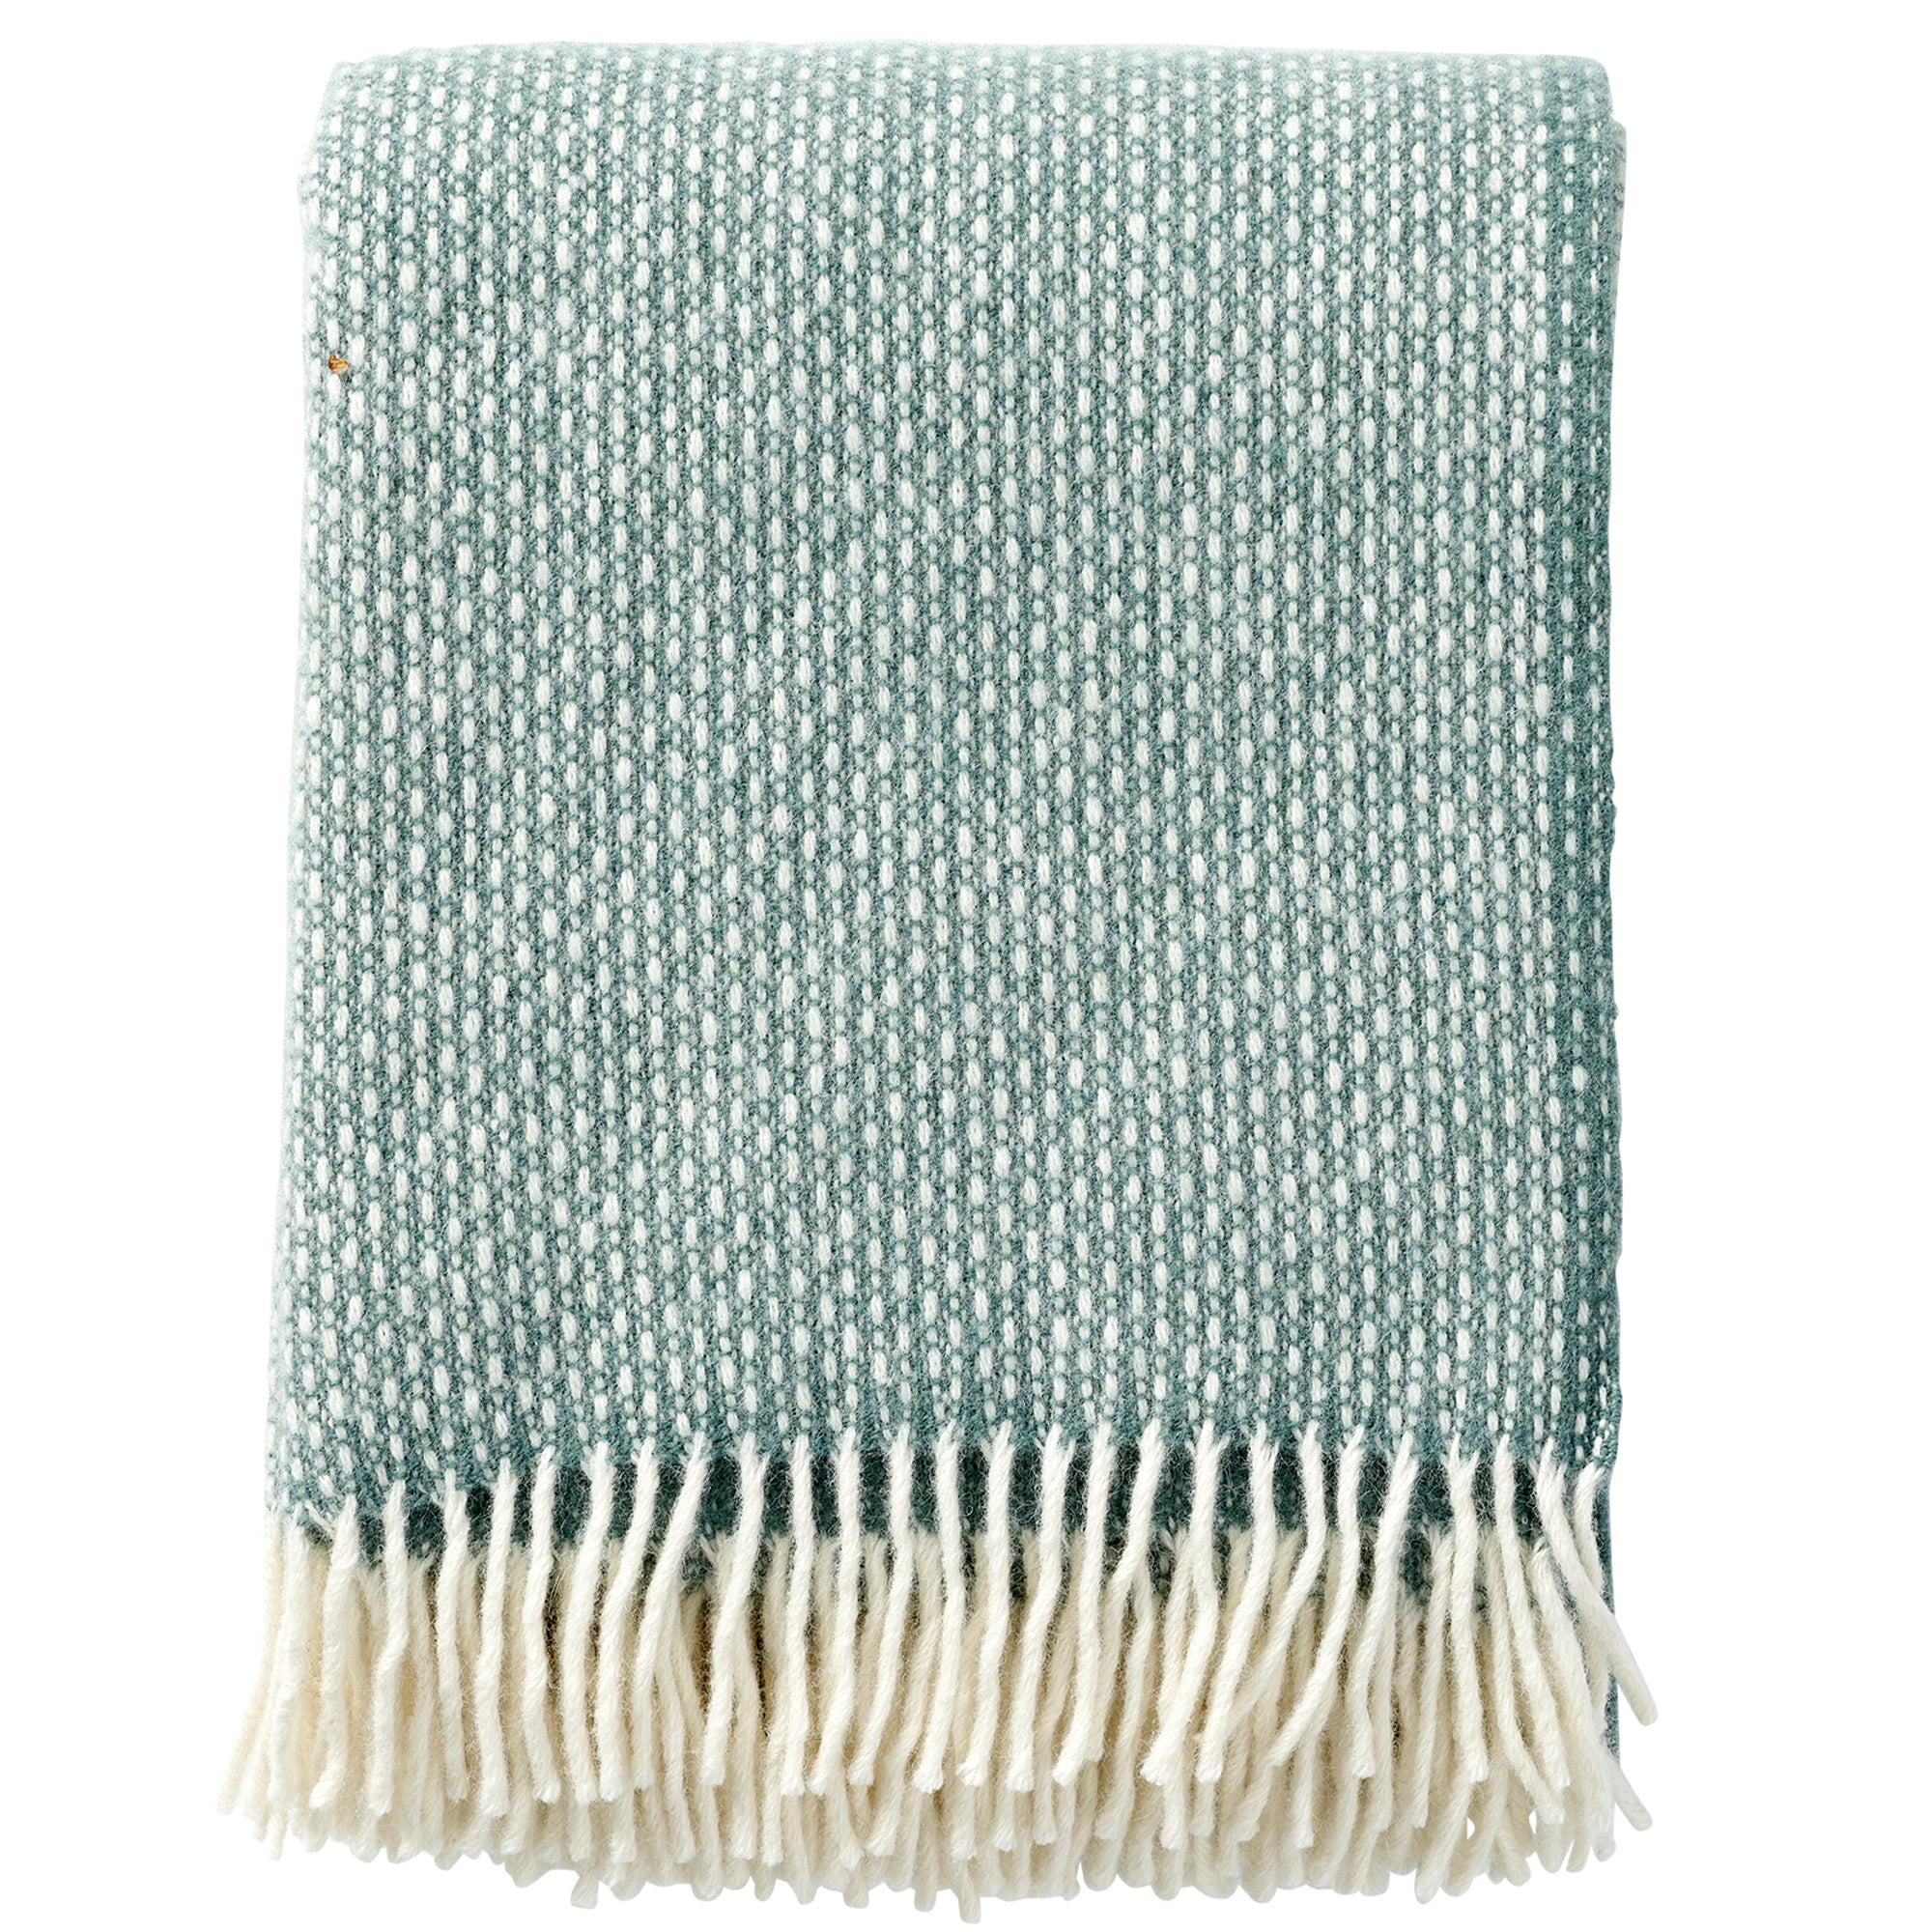 Freckles Dusty Green 130x200cm Brushed Lambswool Throw